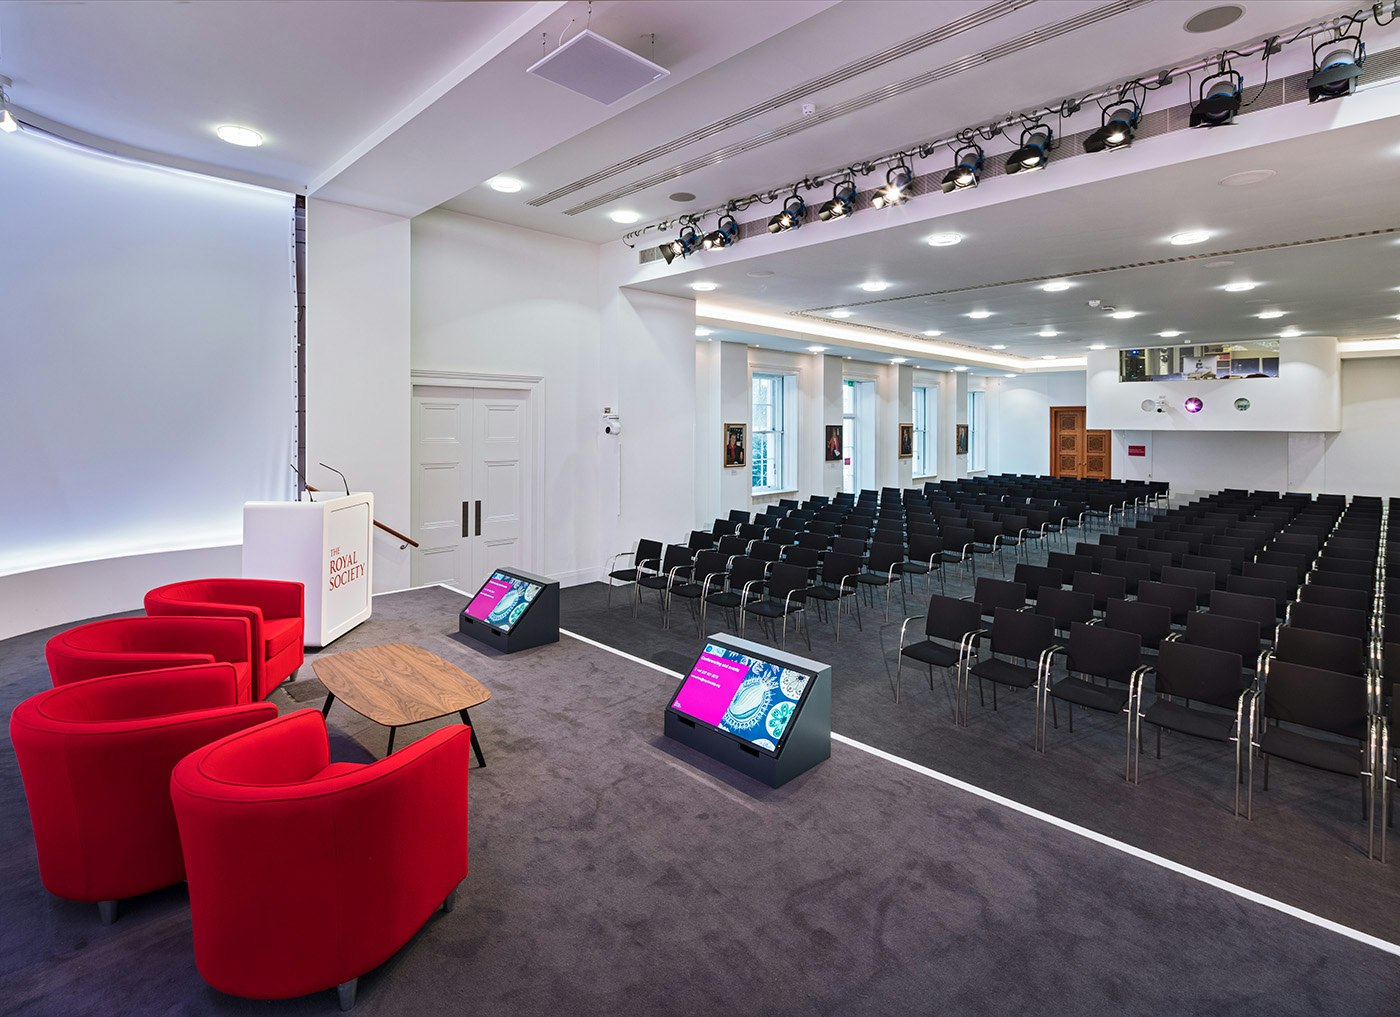 The Royal Society - Wellcome Trust Lecture Hall and City of London Rooms  image 2